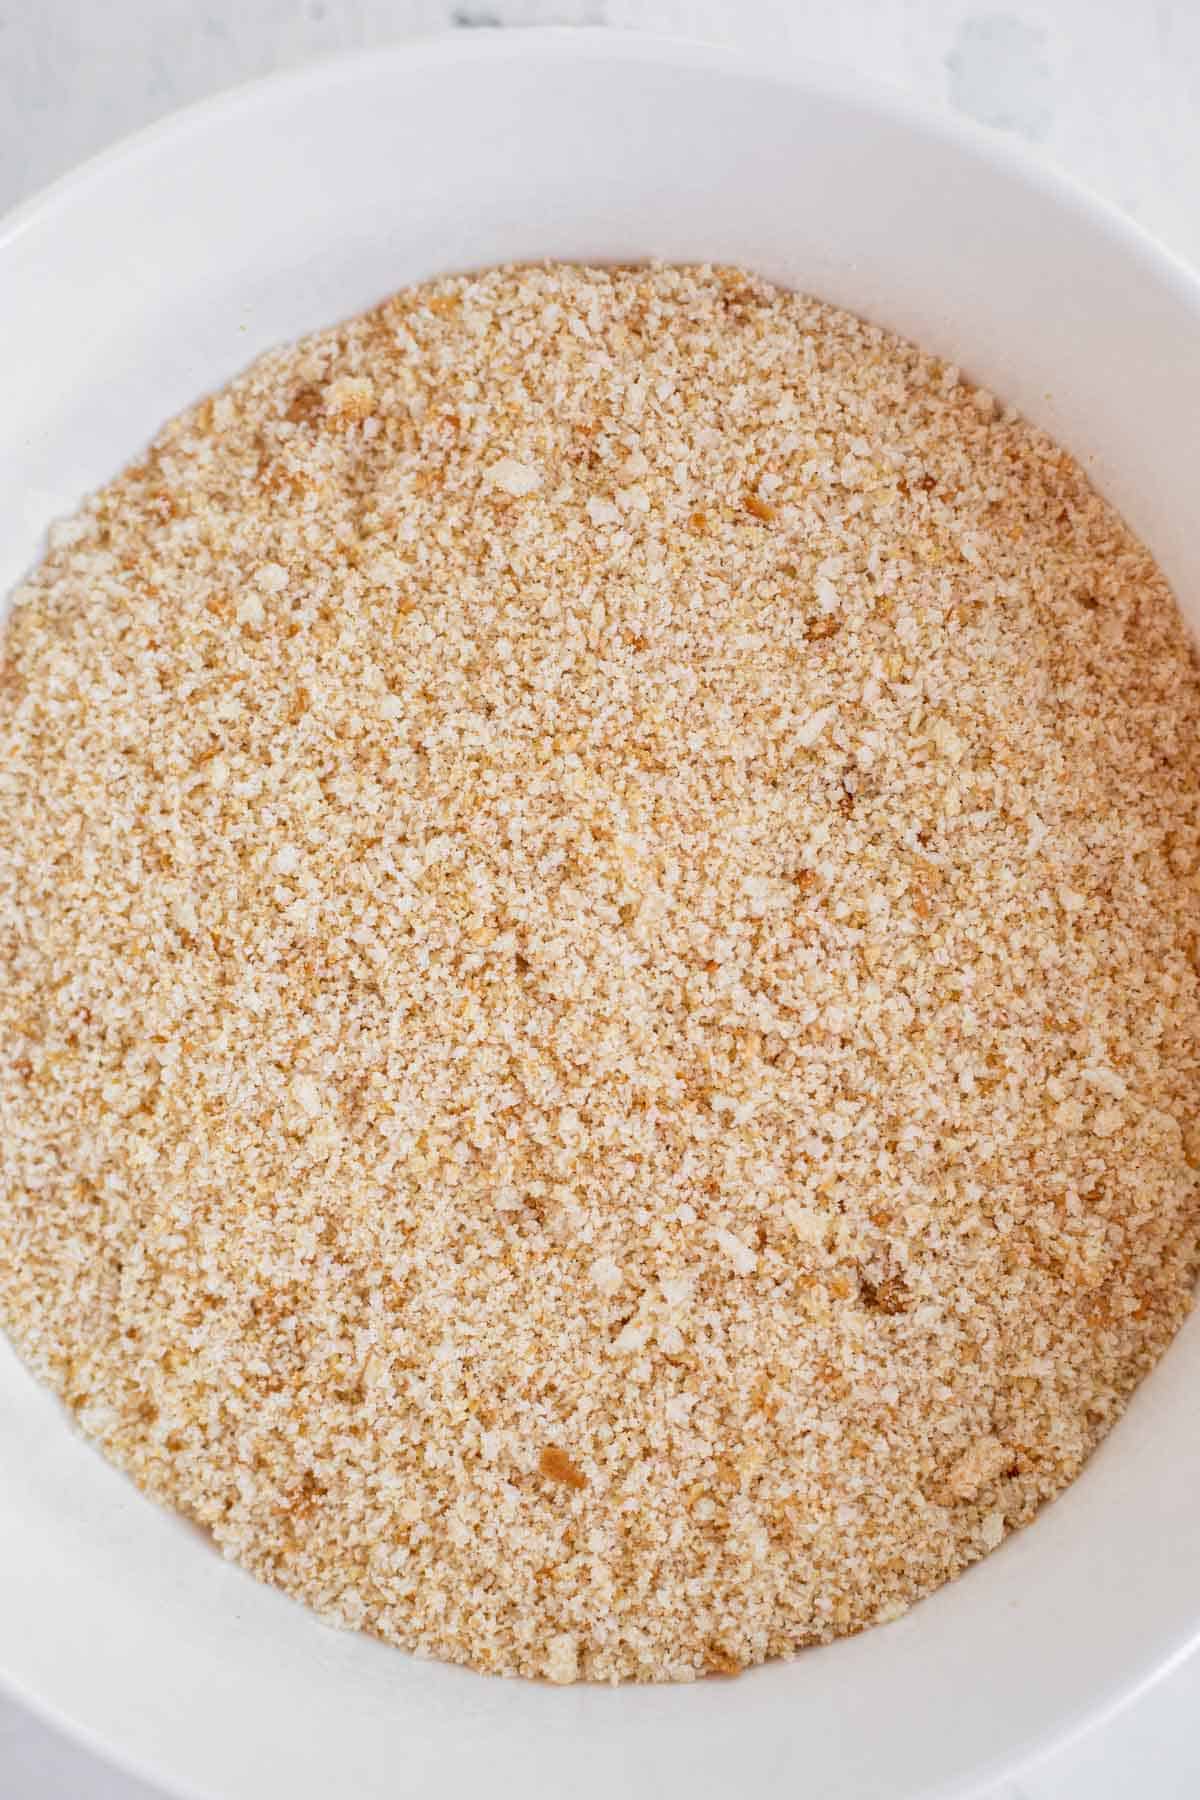 bread crushed into crumbs into a white bowl.